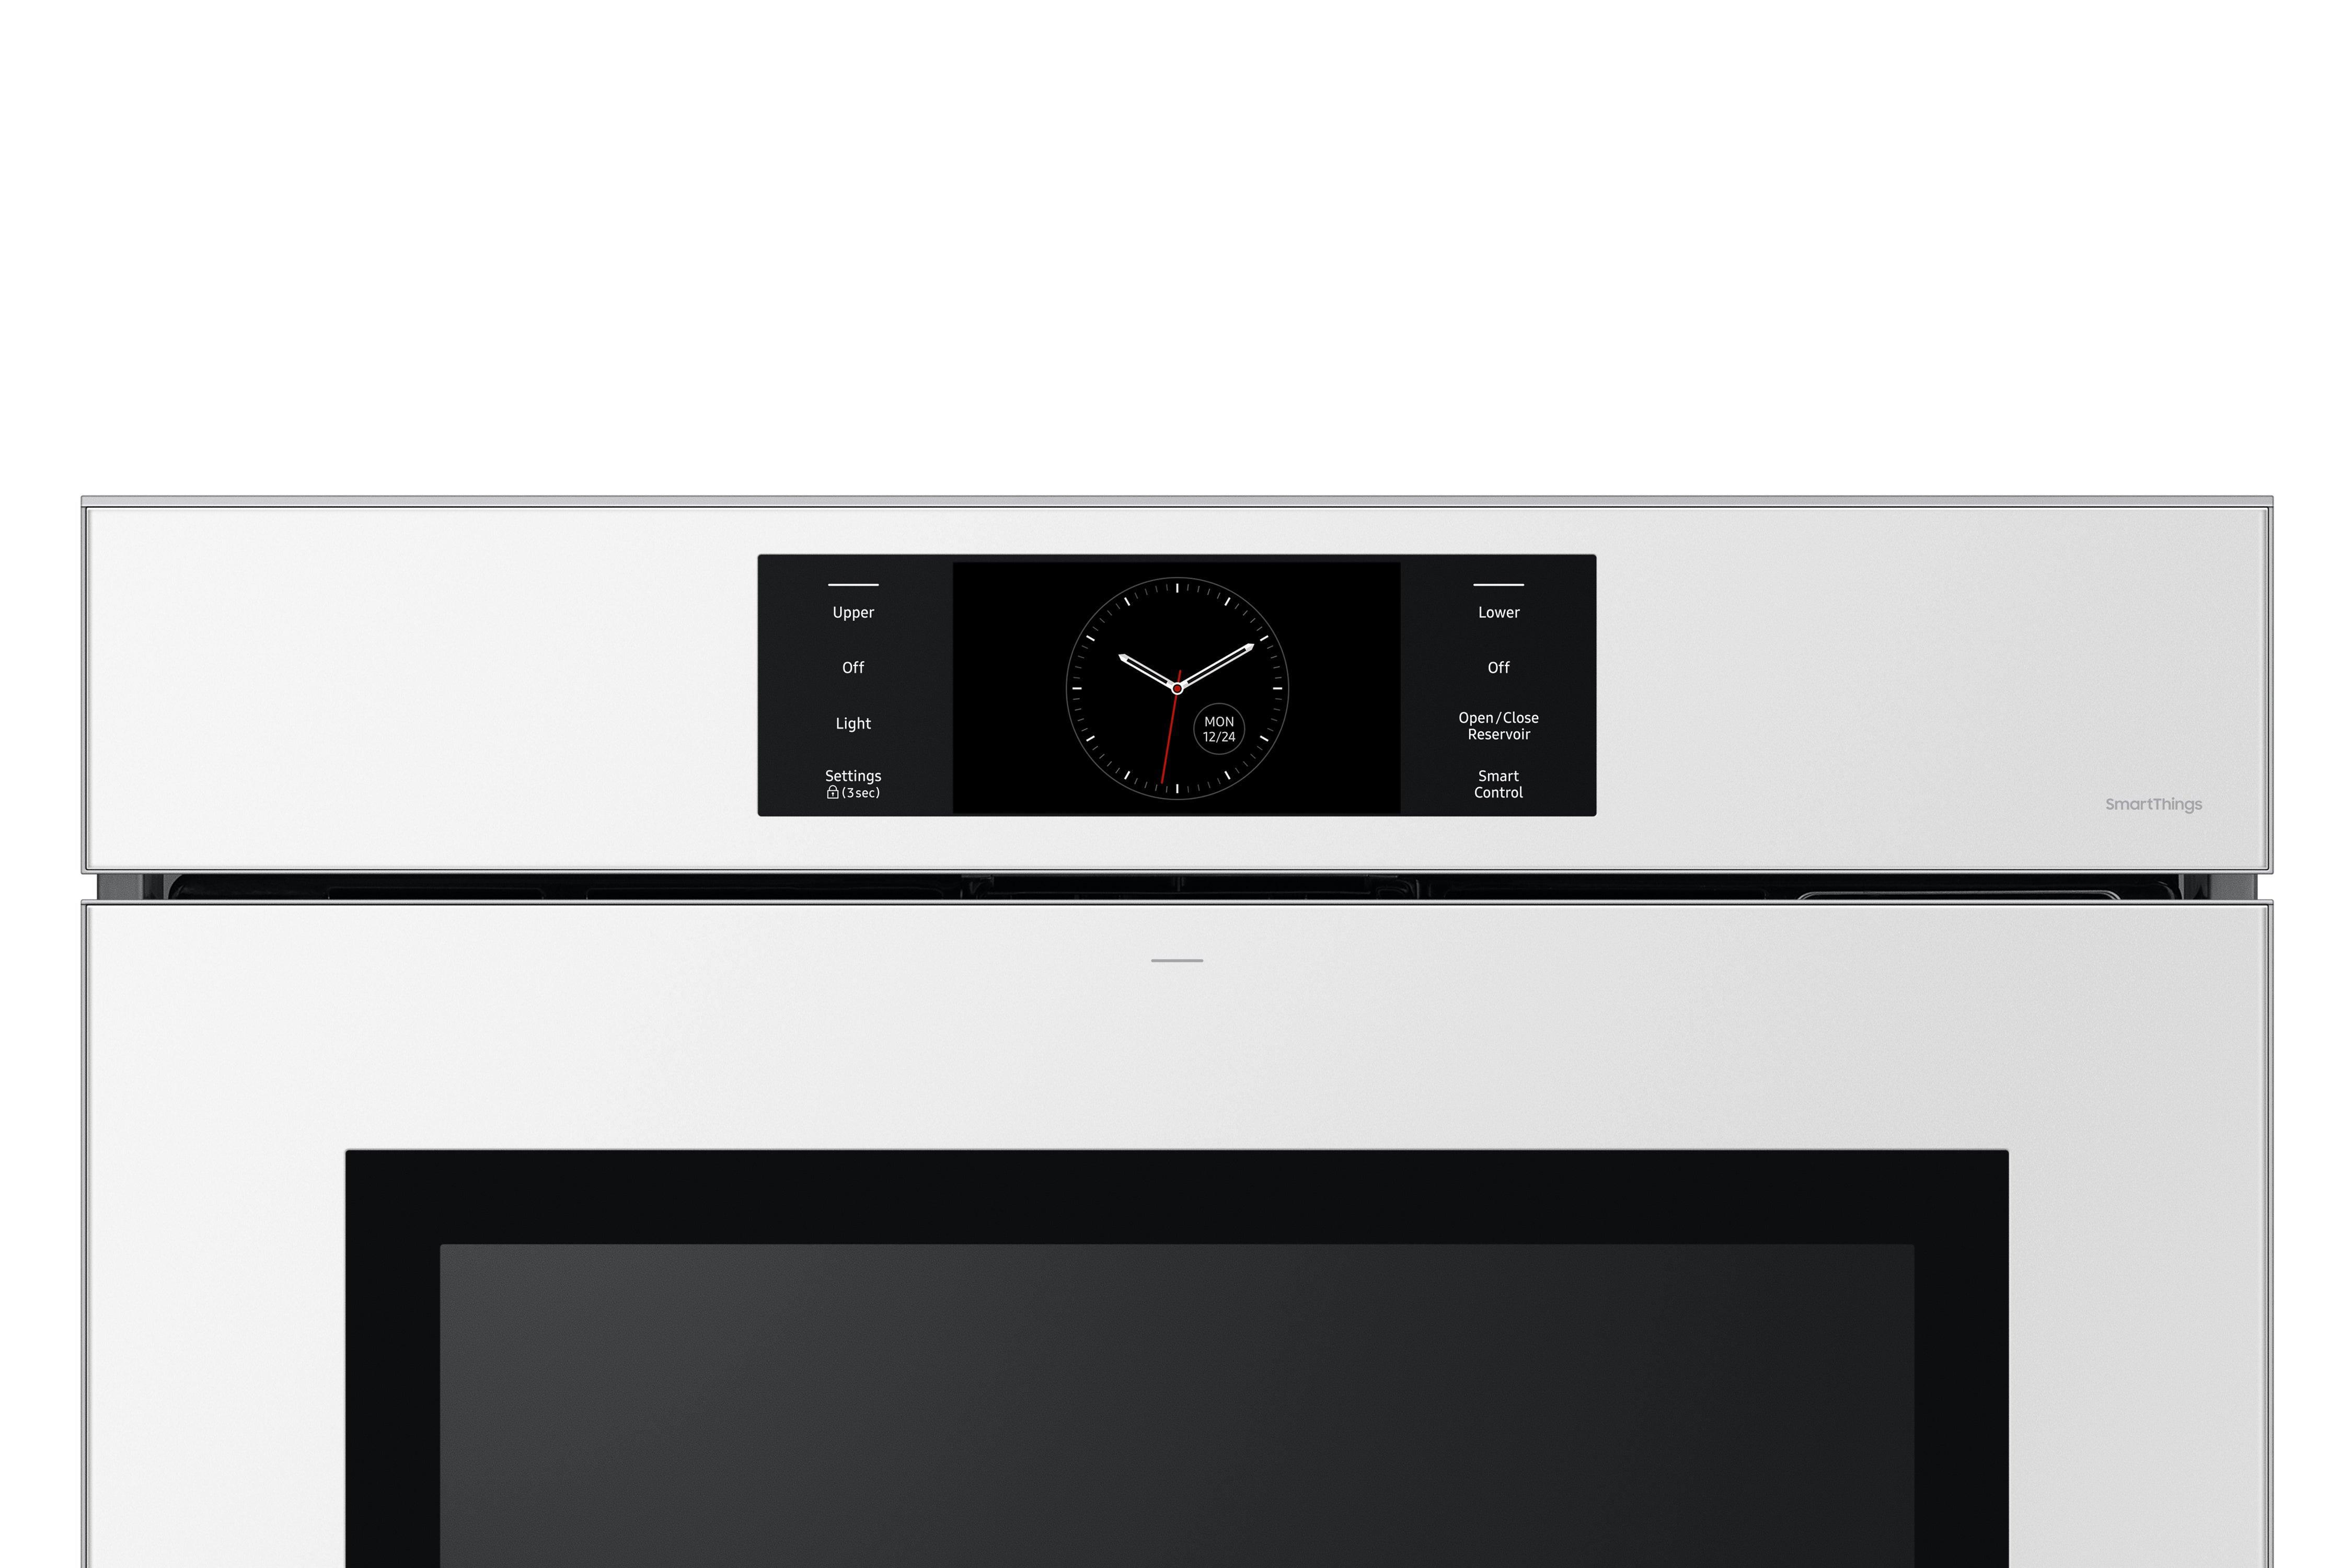 Samsung - 5.1 cu. ft Double Wall Oven in White - NV51CB700D12AA